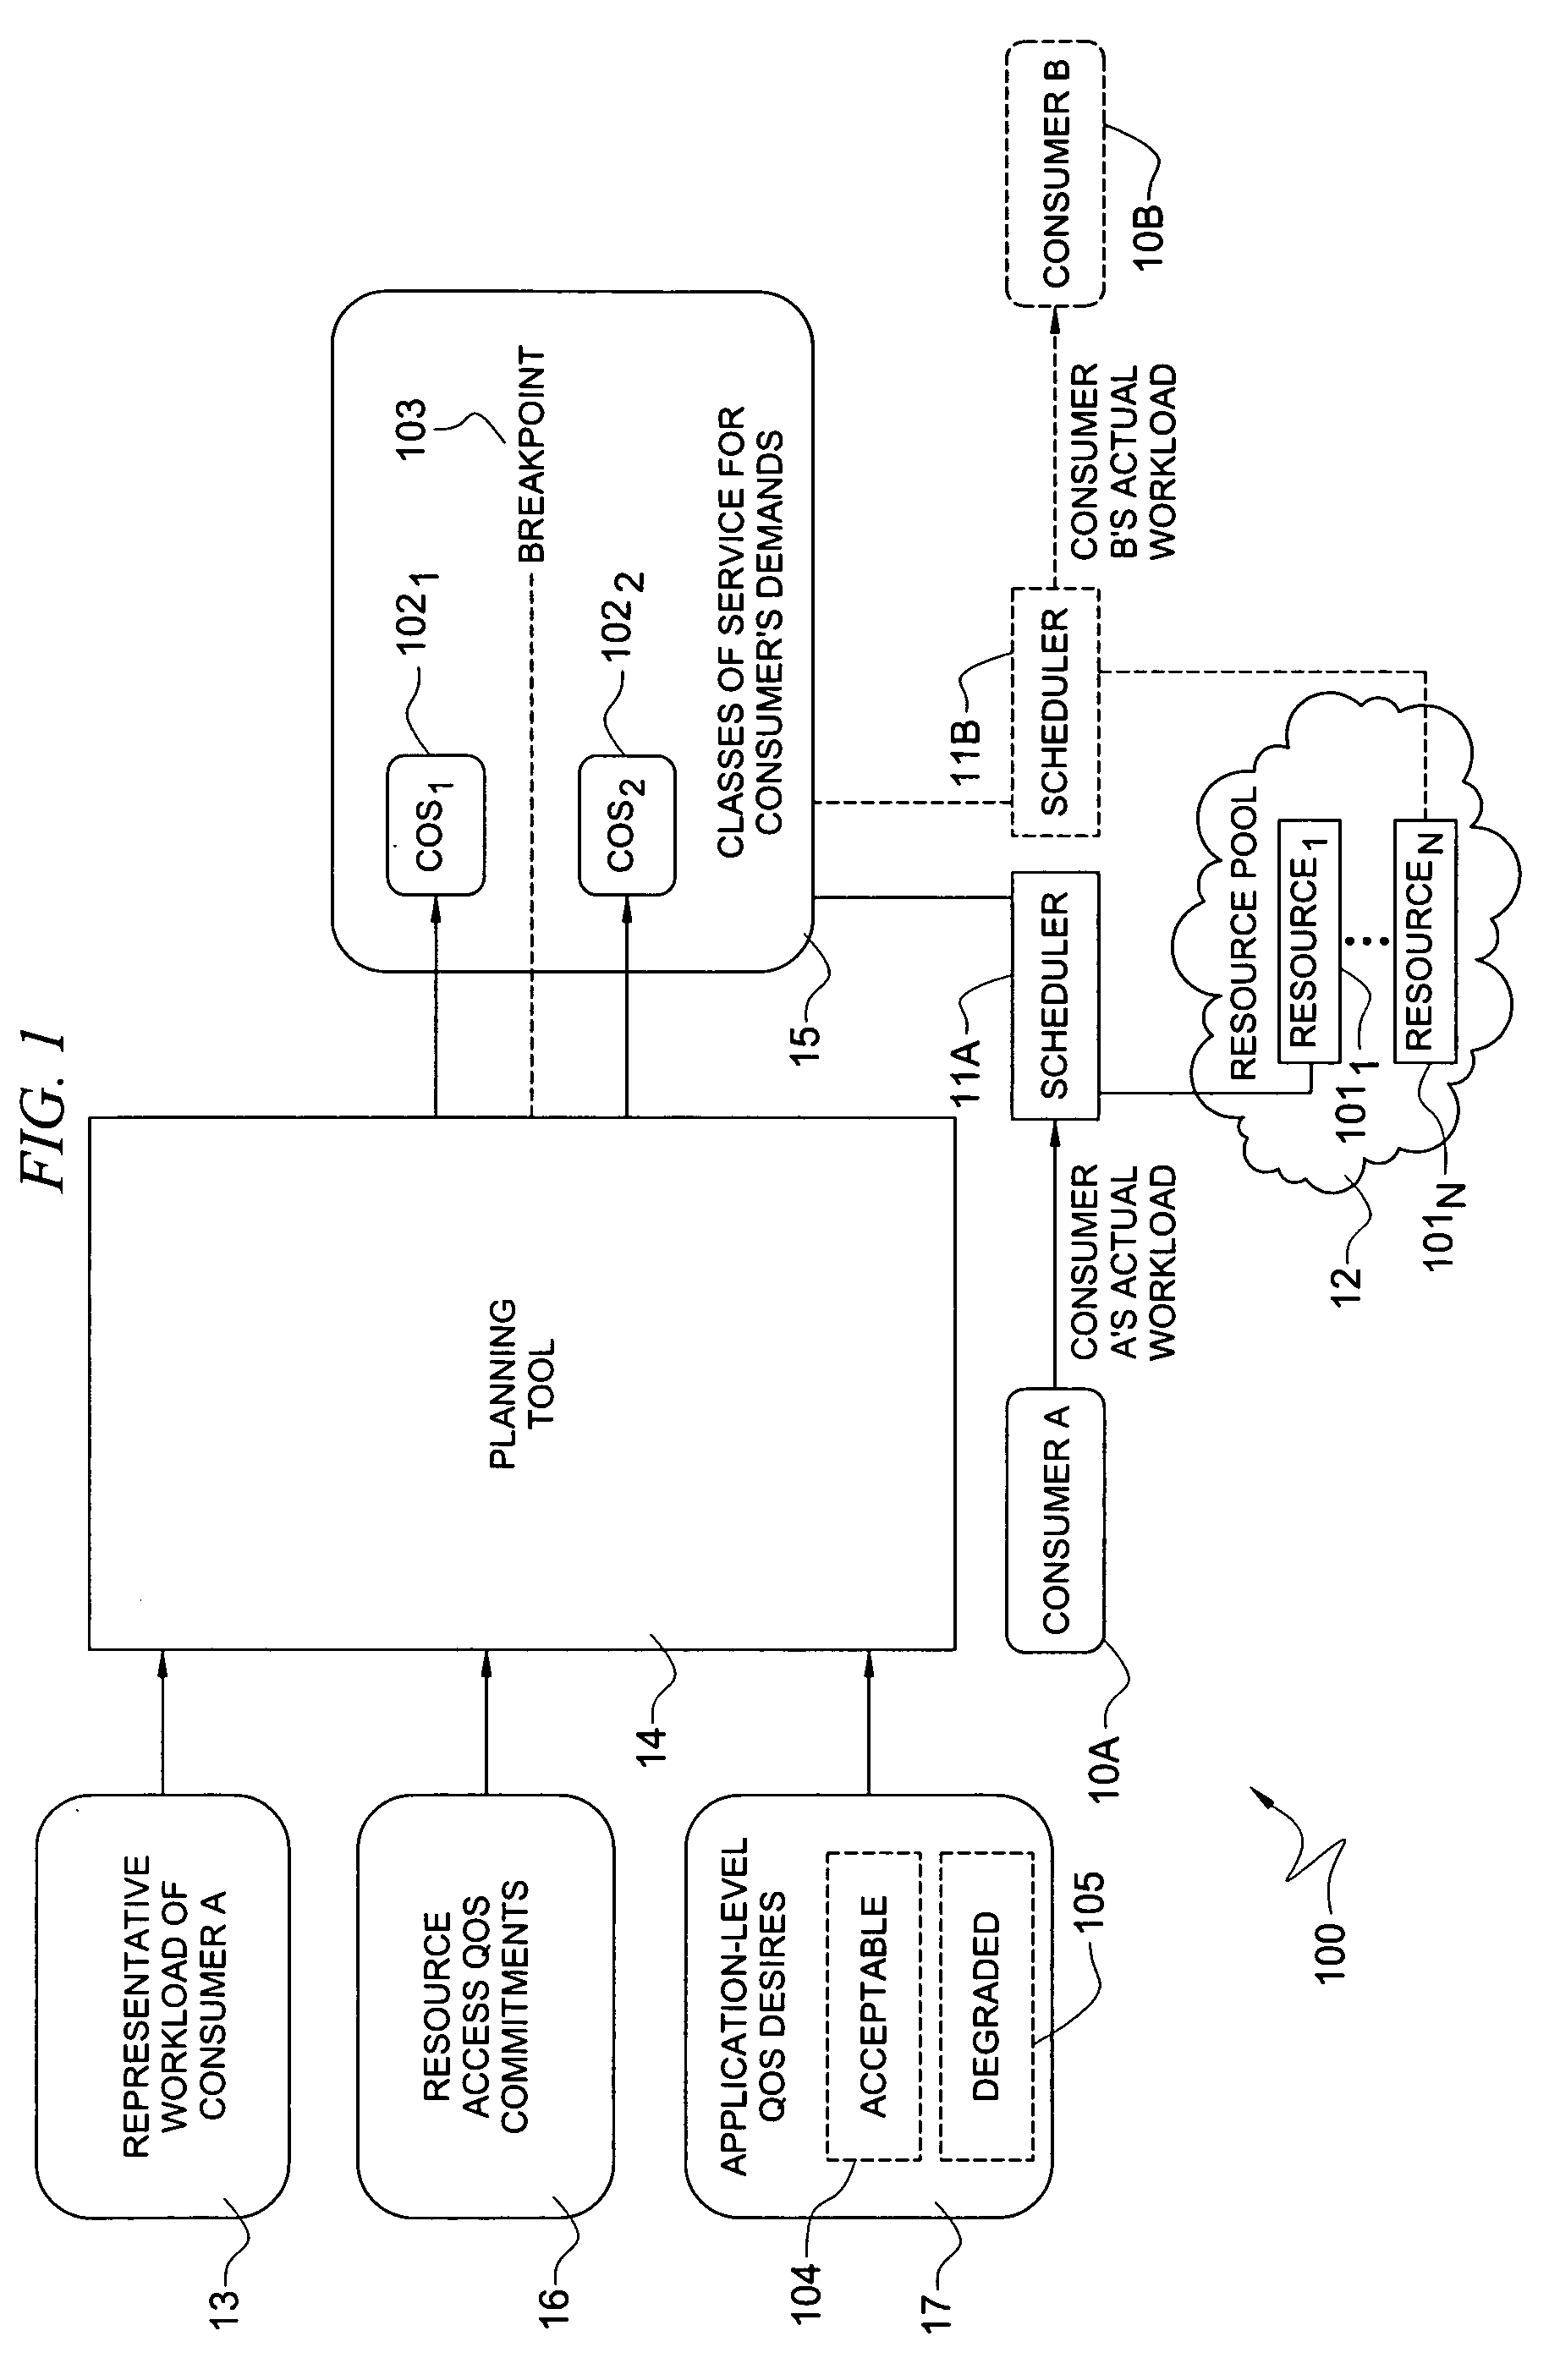 System and method for determining allocation of resource access demands to different classes of service based at least in part on permitted degraded performance